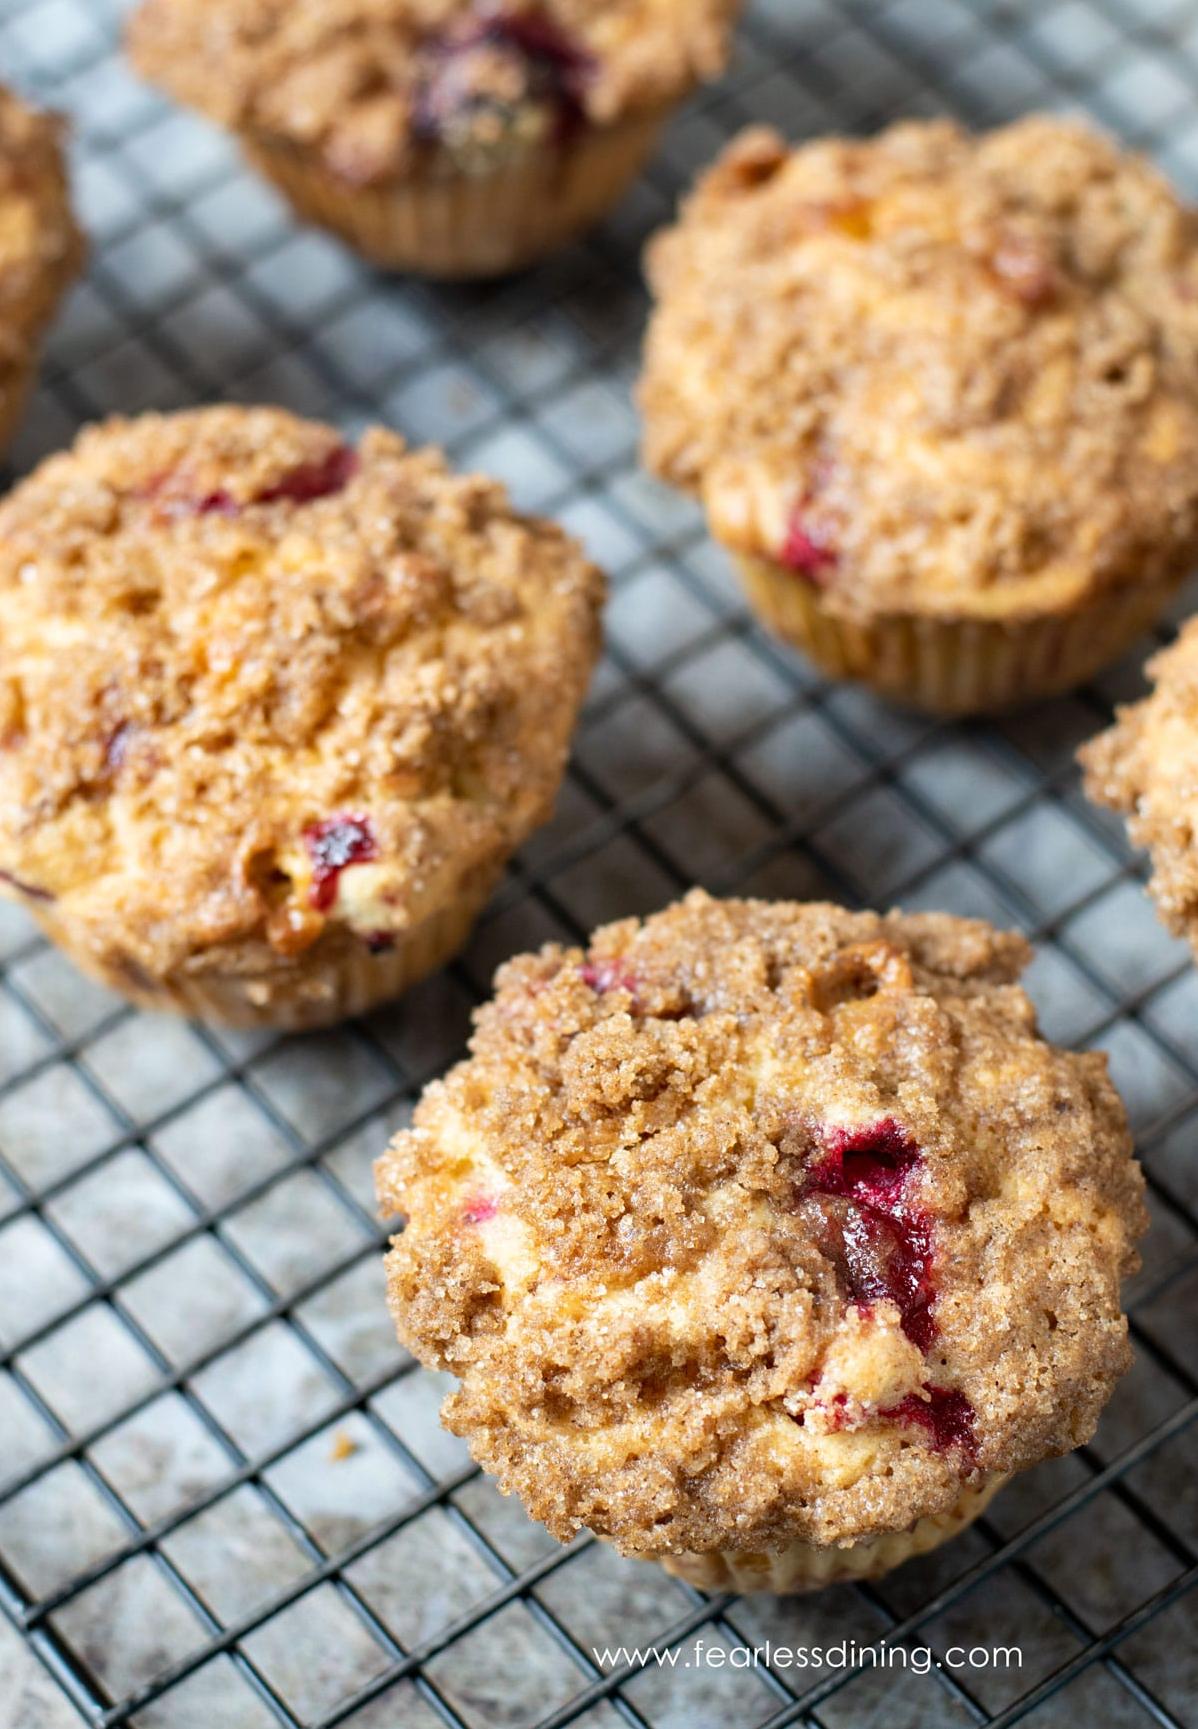  Can you resist these freshly baked muffins? We certainly can't!